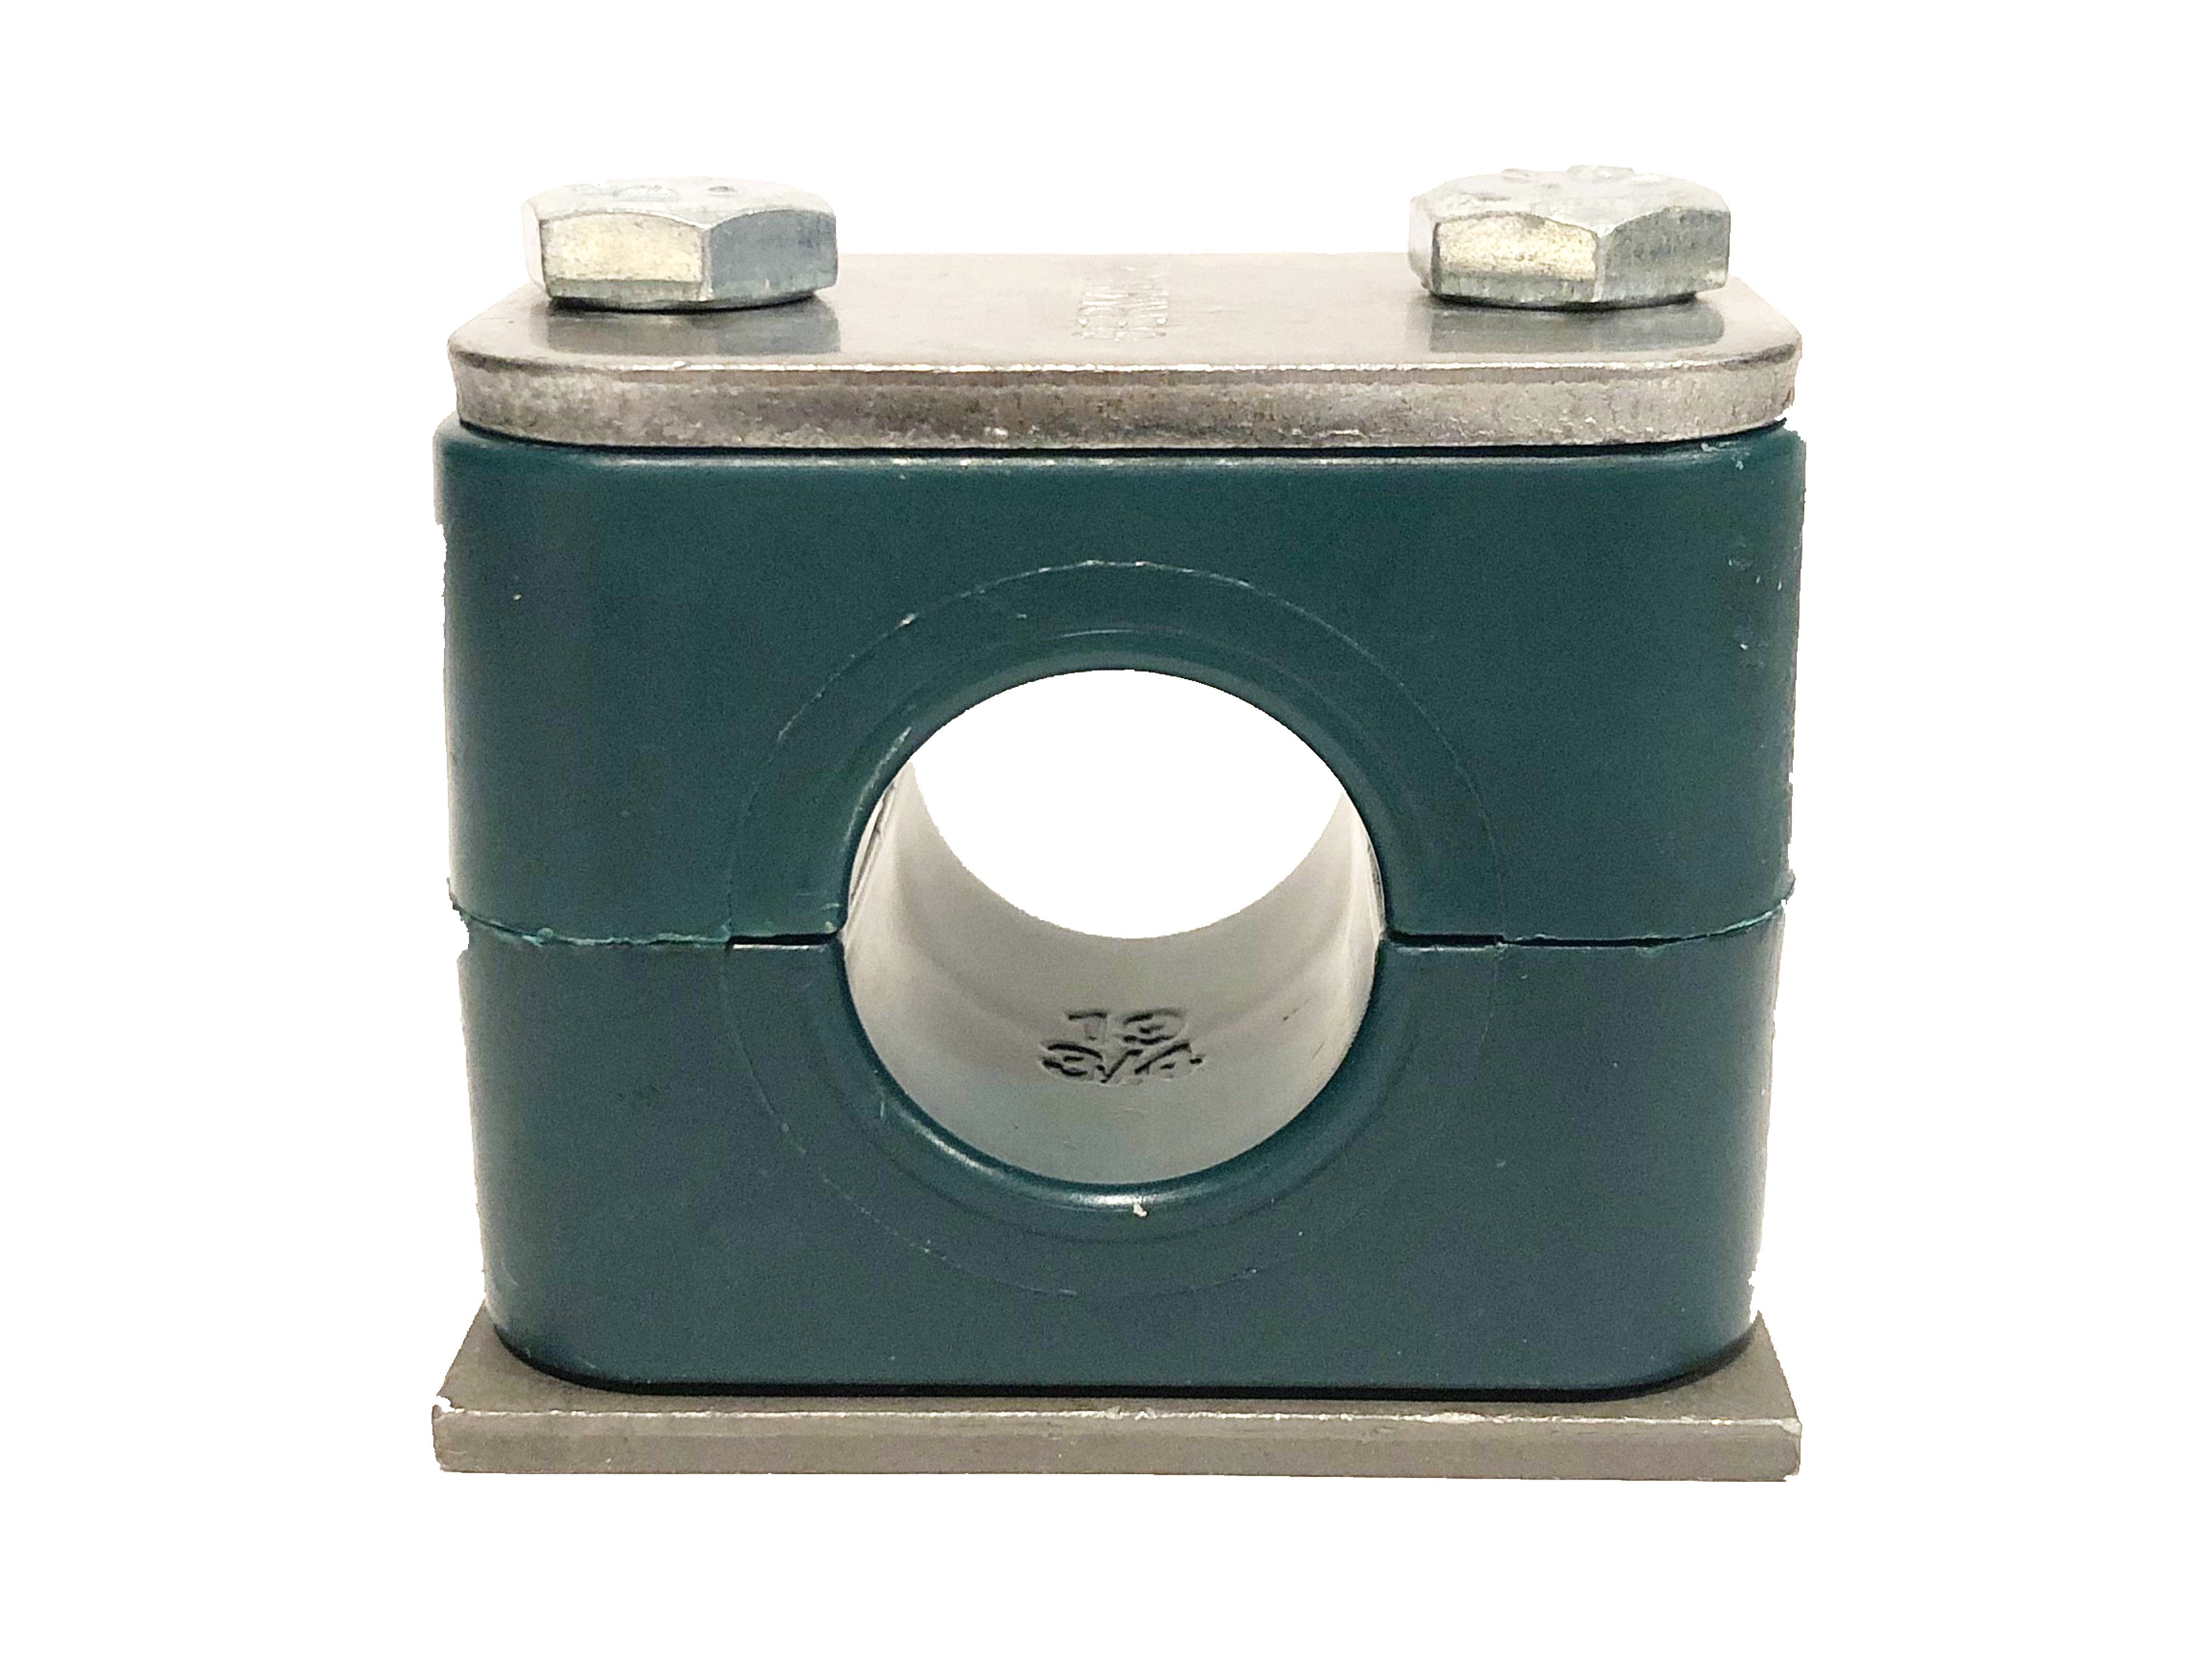 SP-888.9-PP-H-DP-AS-U-W5 : Stauff Clamp, Single Weld Plate, 3.5" (88.9mm) OD, for 3" Pipe, Green PP Insert, Smooth Interior, 316SS